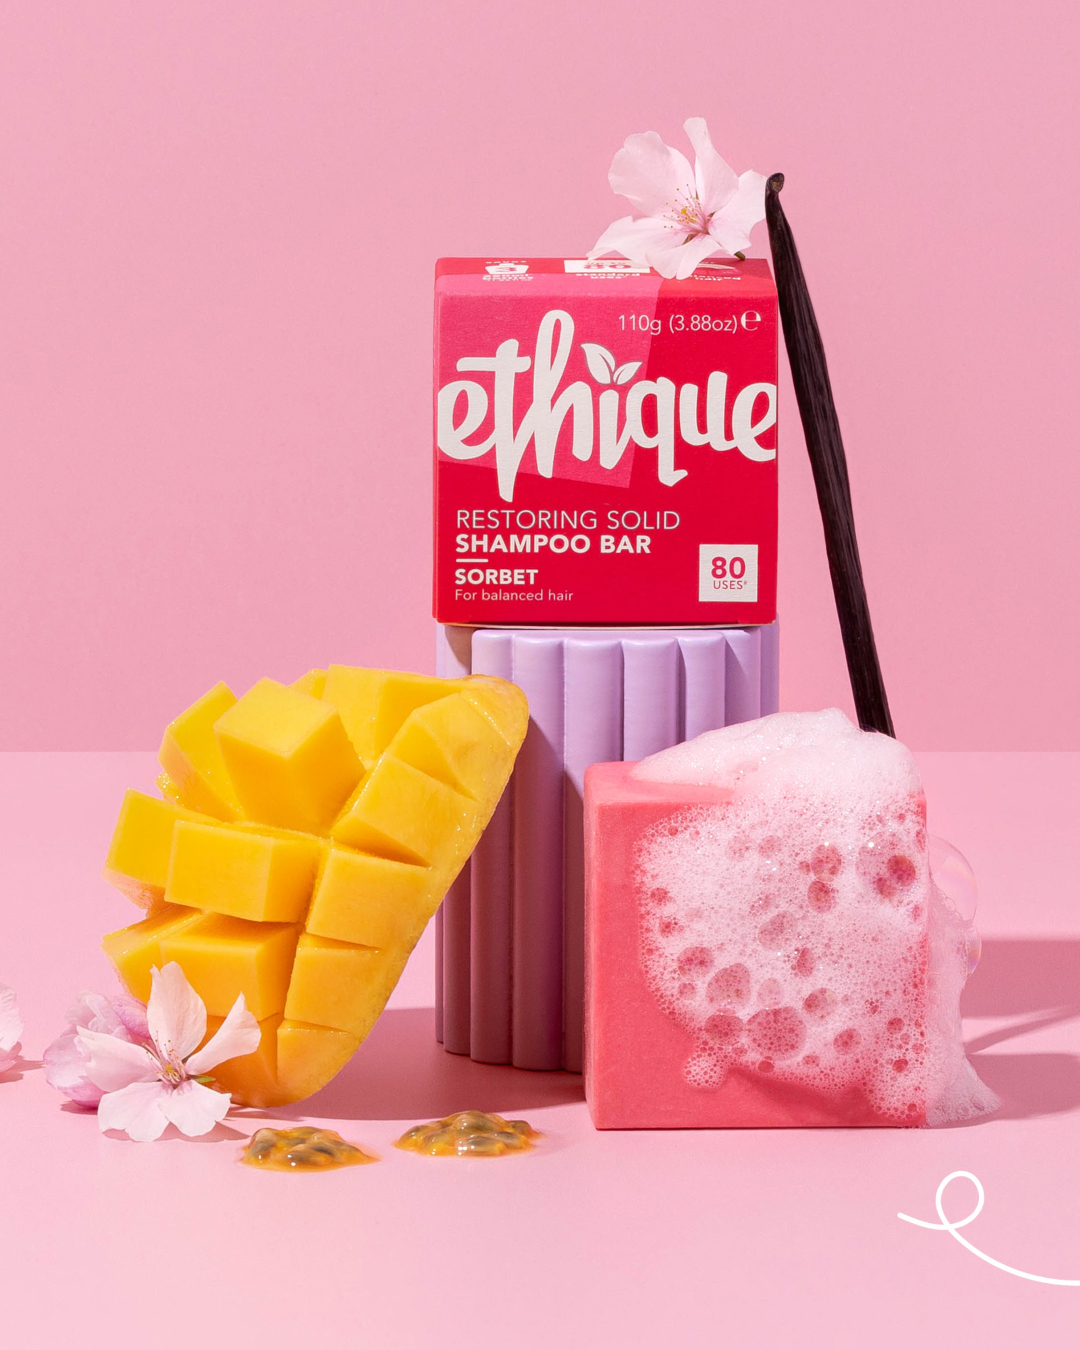 A hot pink soap box of Ethique sorbet shampoo with a square of foaming pink soap and mango styled against a light pink background.